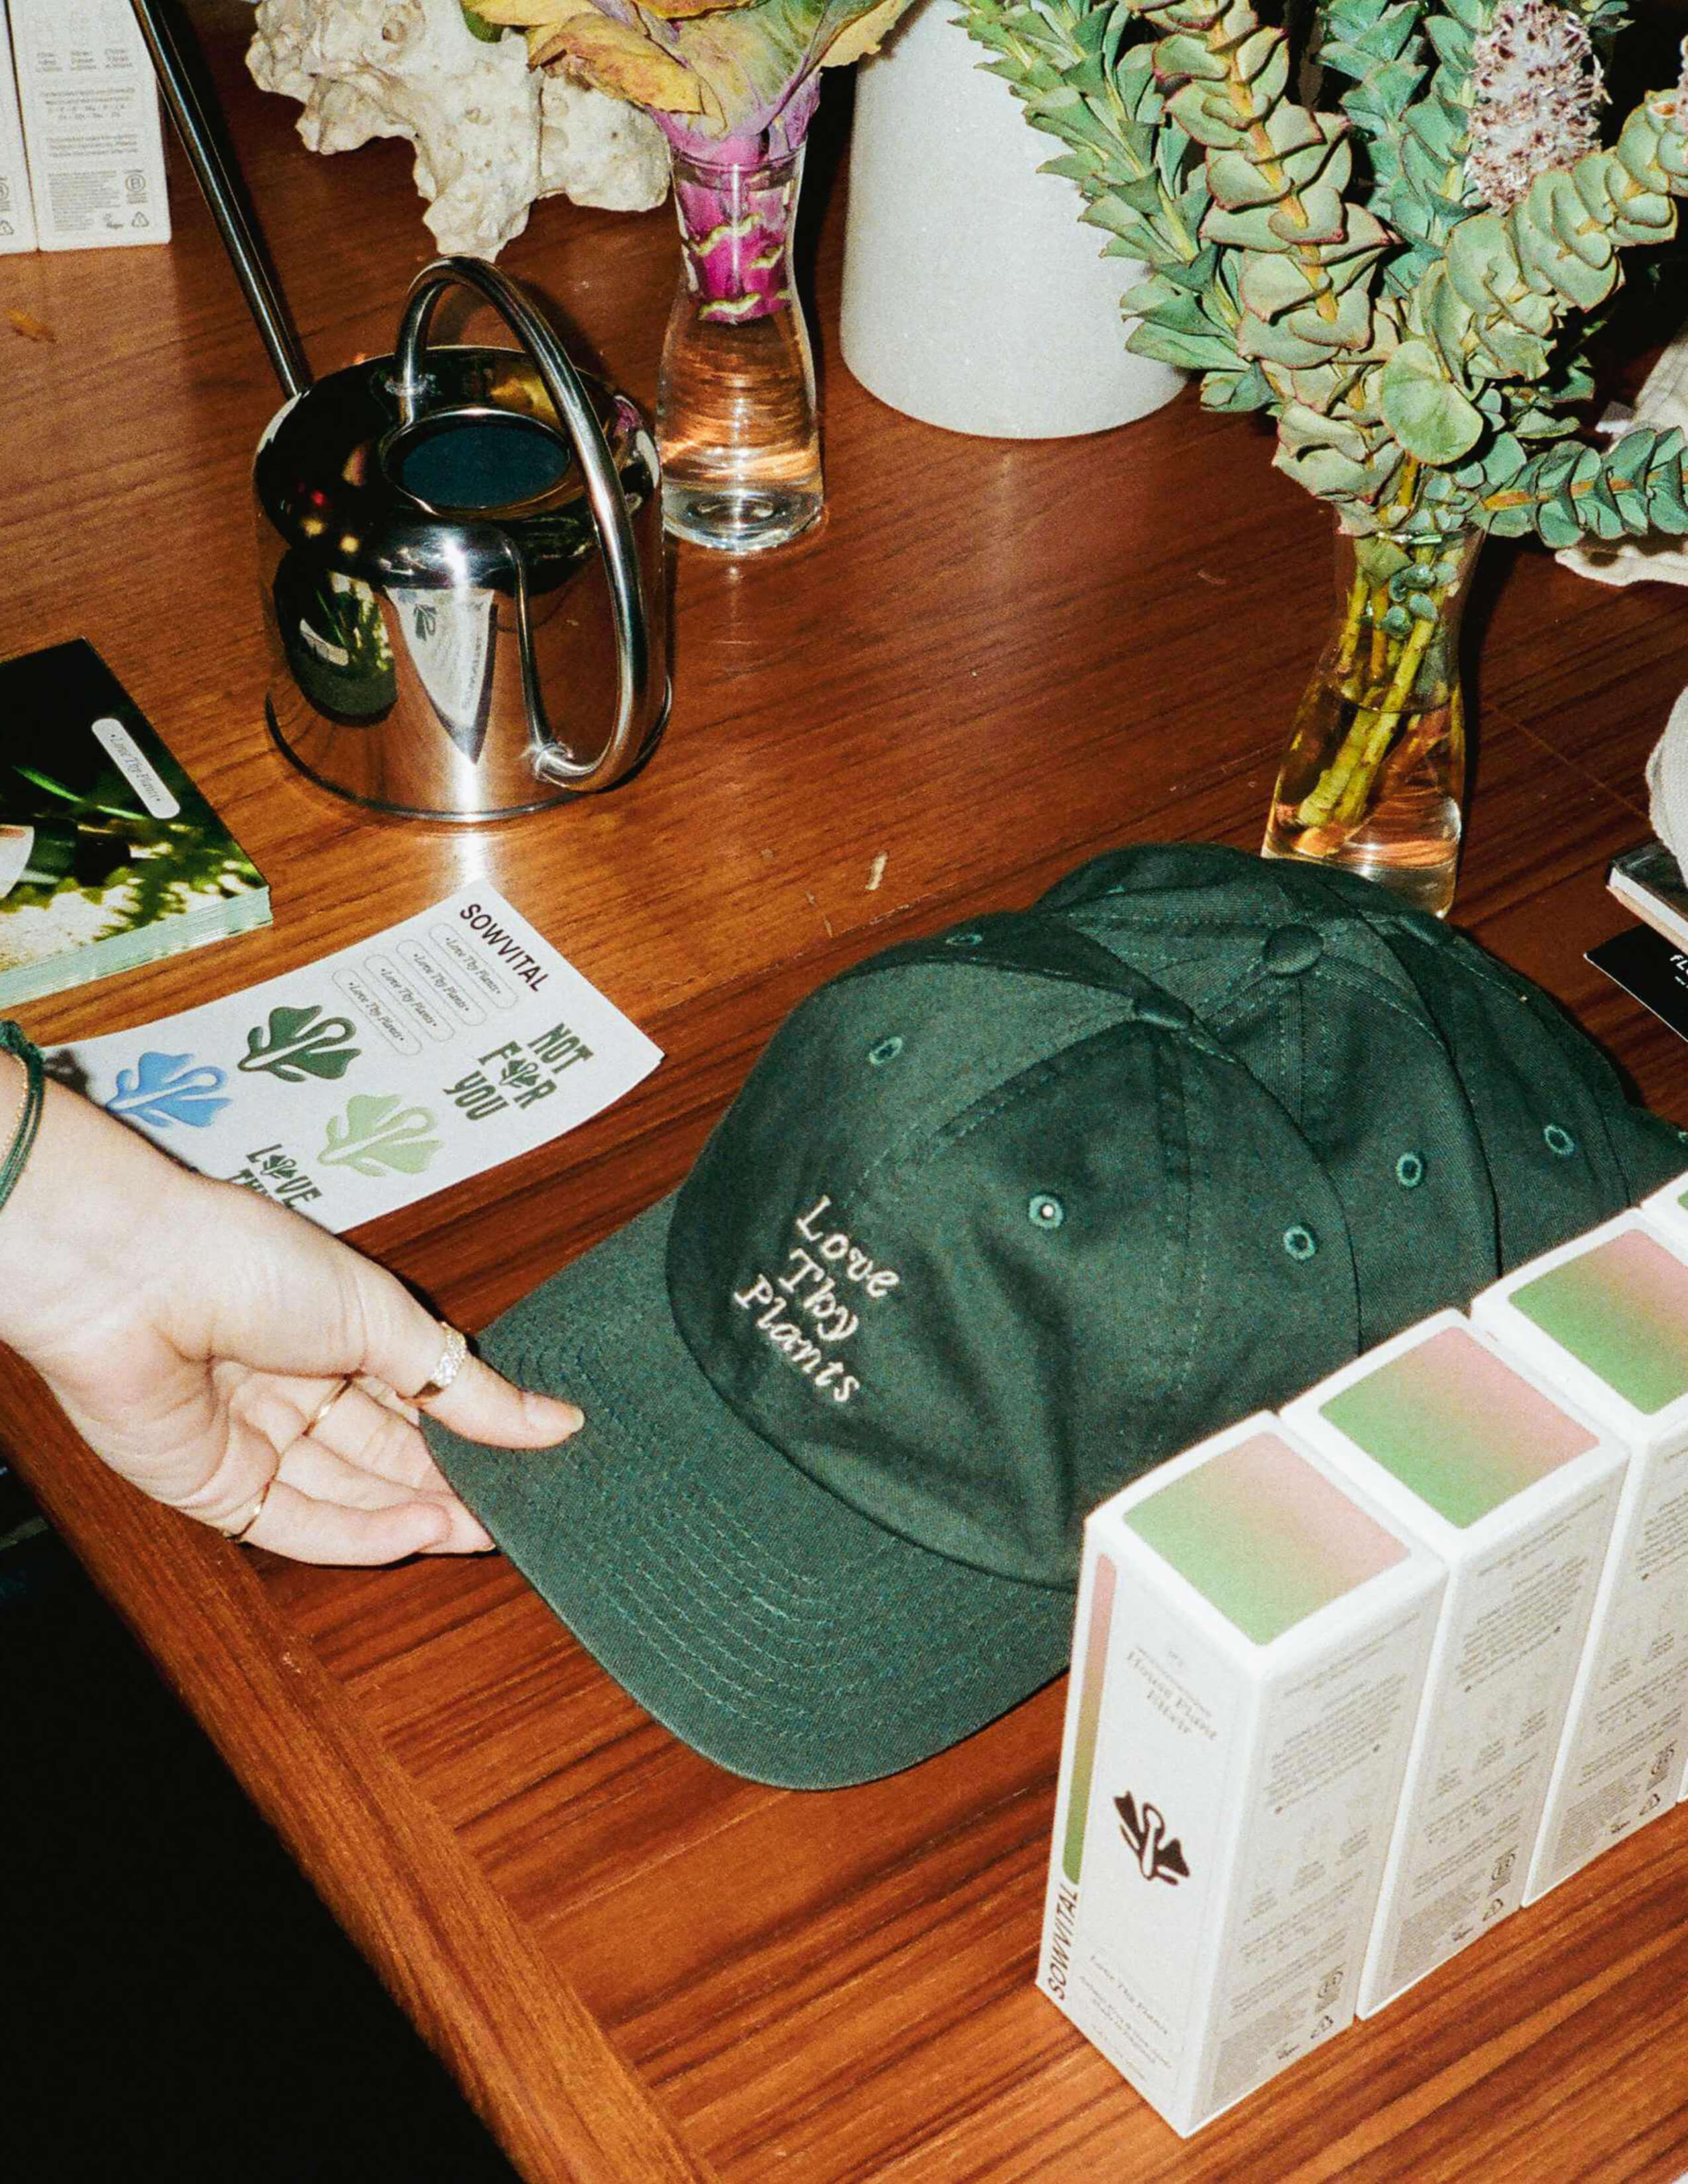 Different kinds of plants were inside separated glass bottles while there was a silver water can, Sowvital branding stickers, ‘Love Thy Plants’ caps and house plant products on the table.